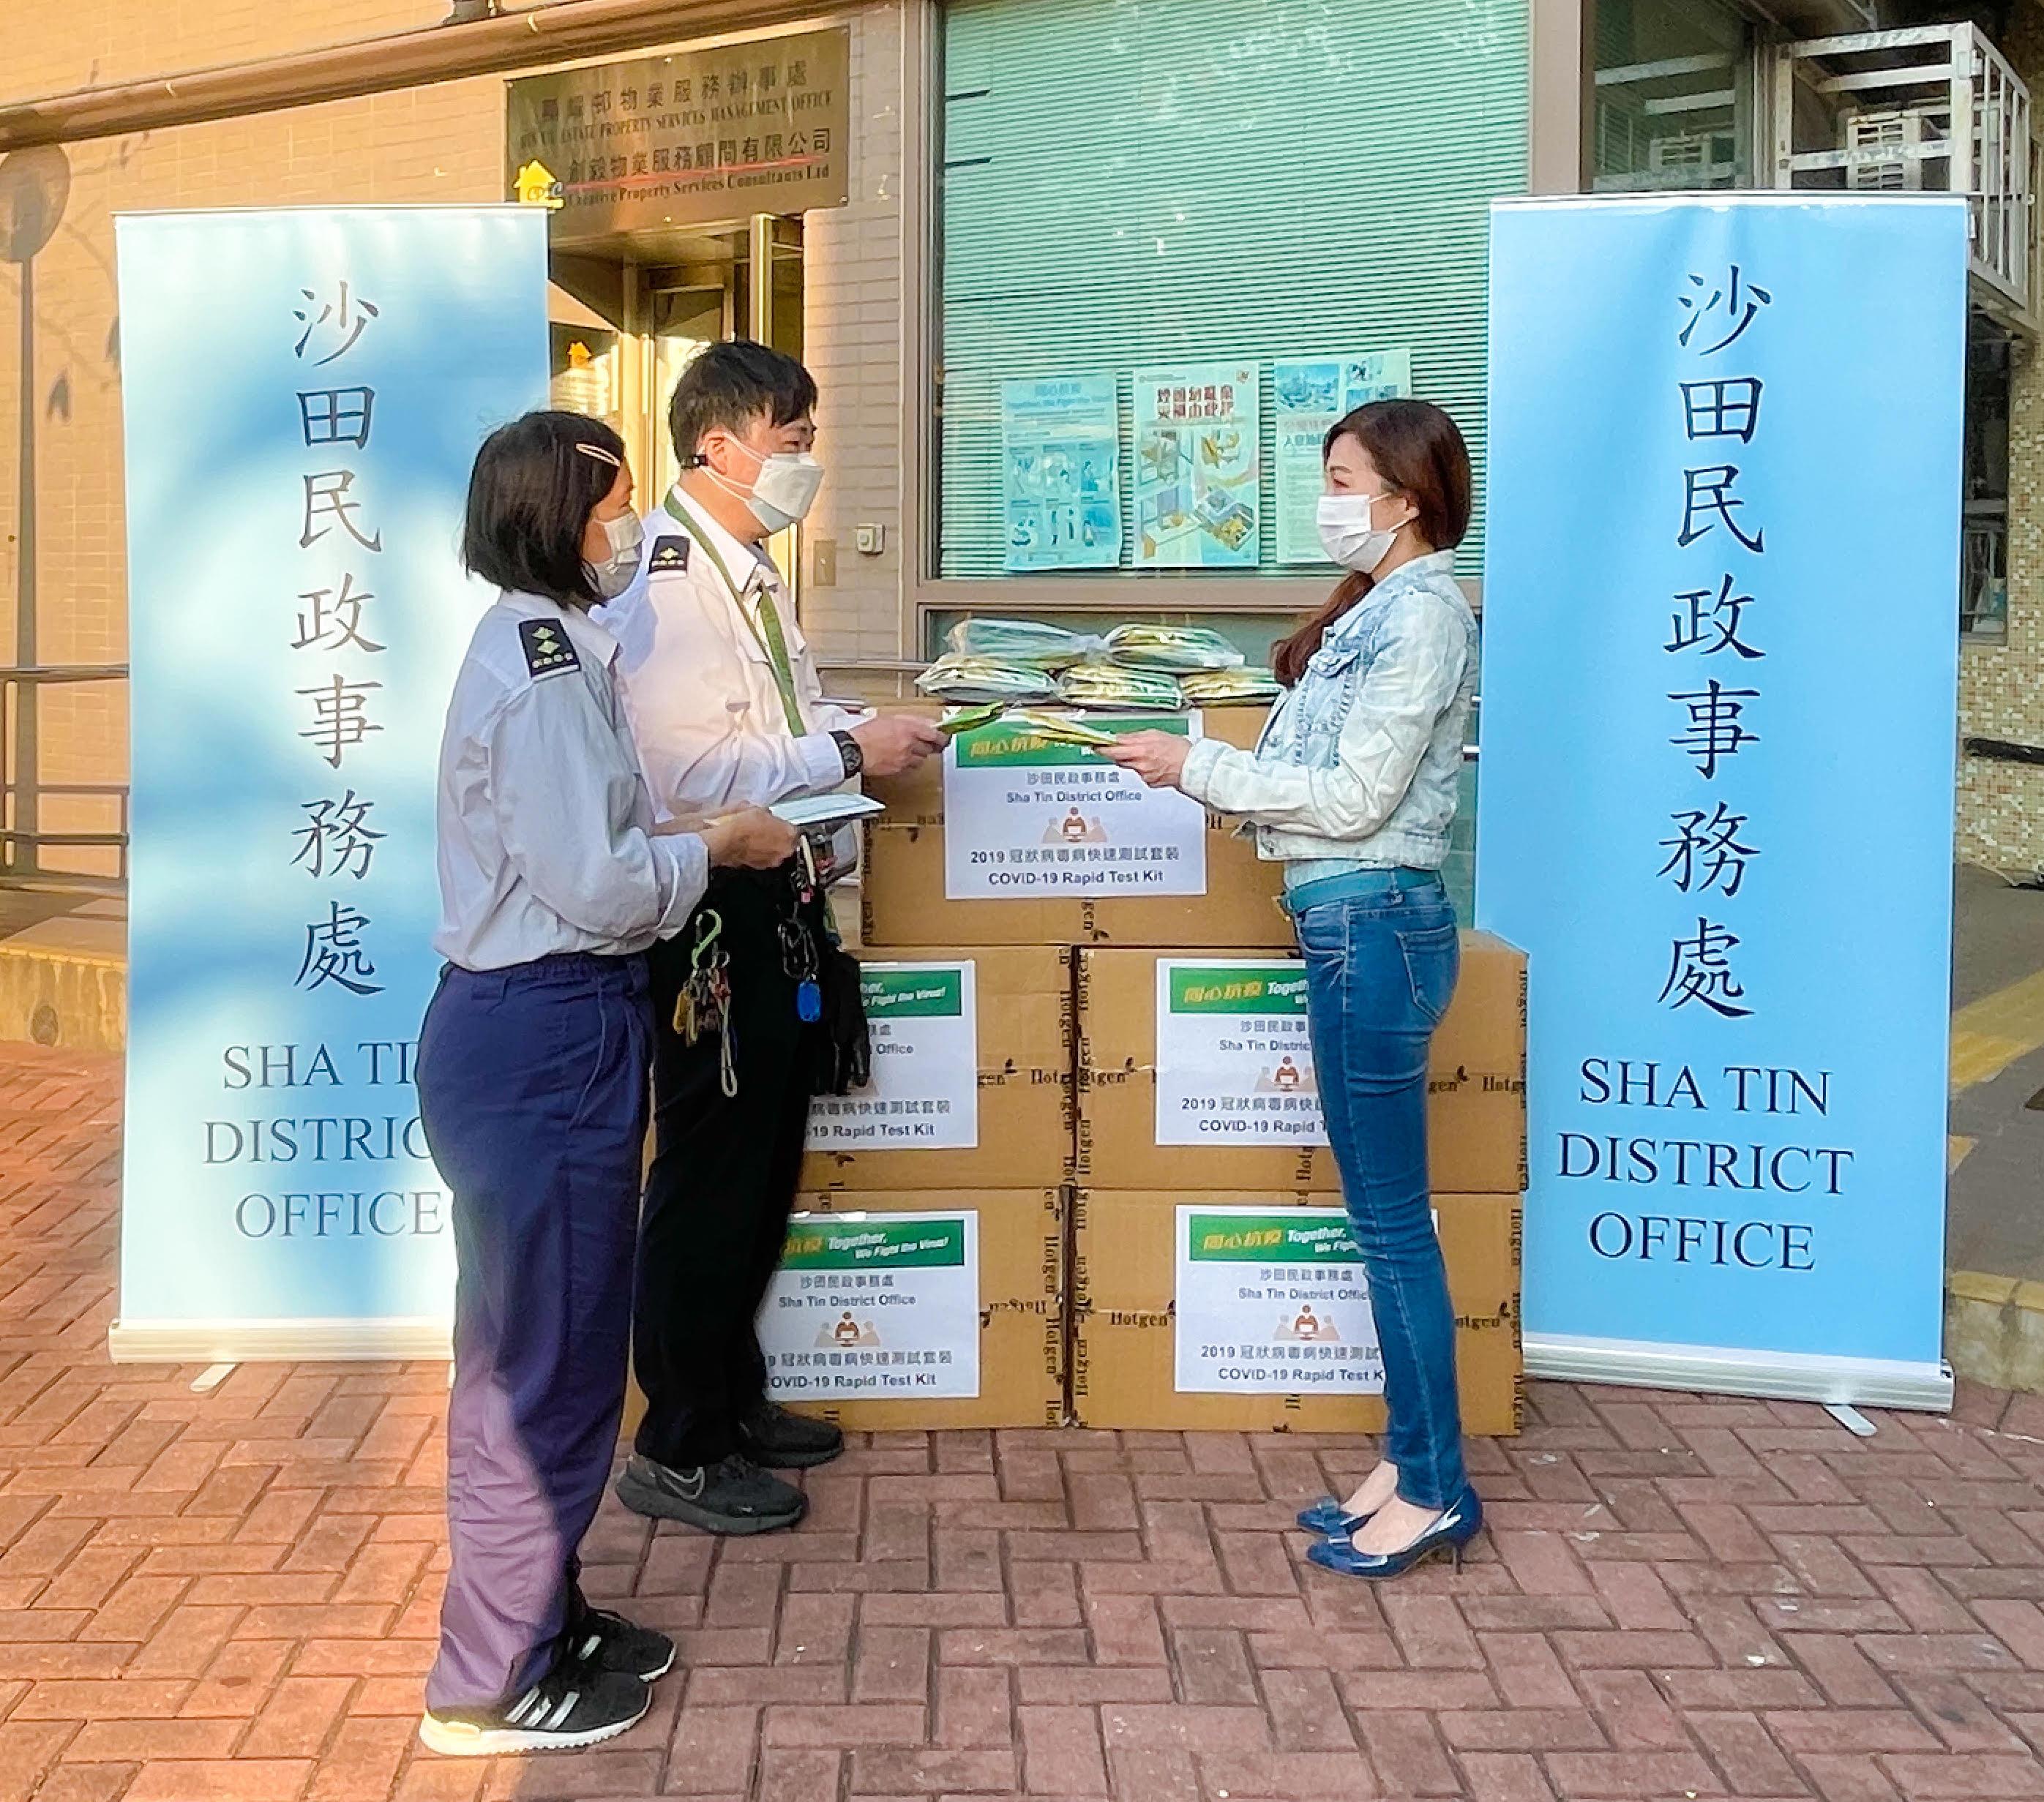 The Sha Tin District Office today (March 5) distributed COVID-19 rapid test kits to households, cleansing workers and property management staff living and working in Hin Yiu Estate for voluntary testing through the property management company.